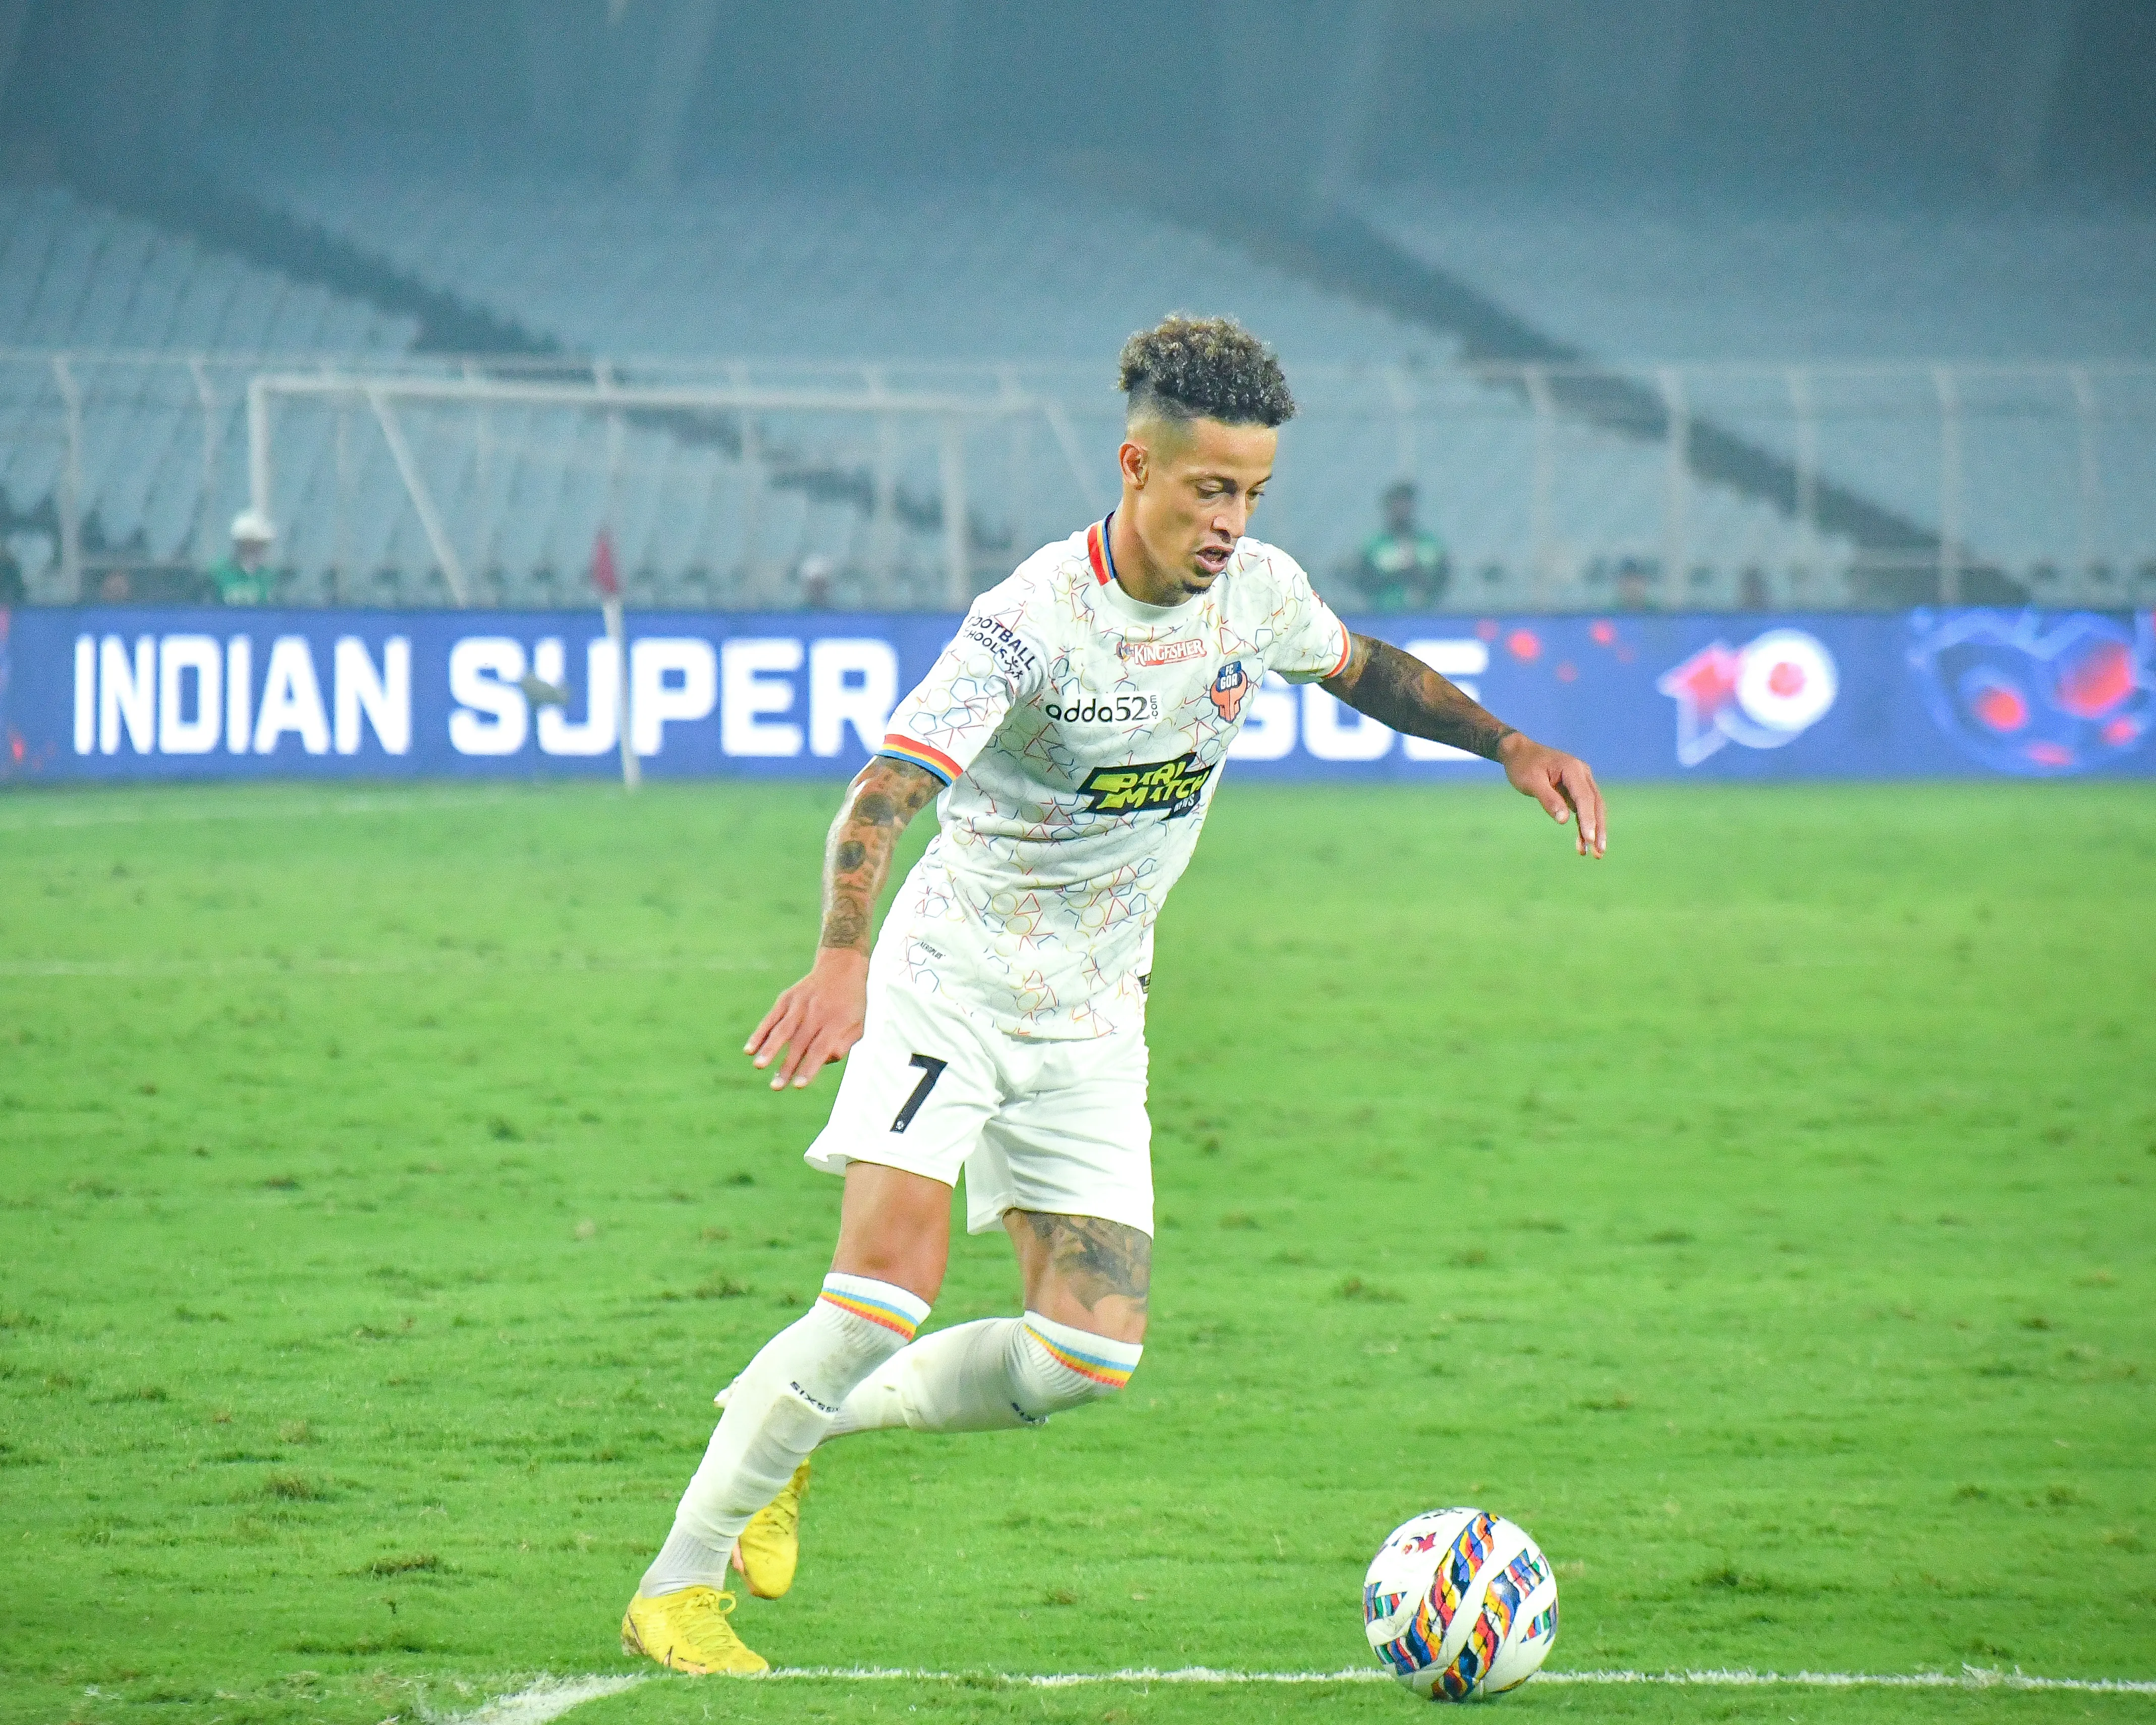 Noah is in search for his third goal in the Mohun Bagan vs FC Goa match  Image - SportzPoint